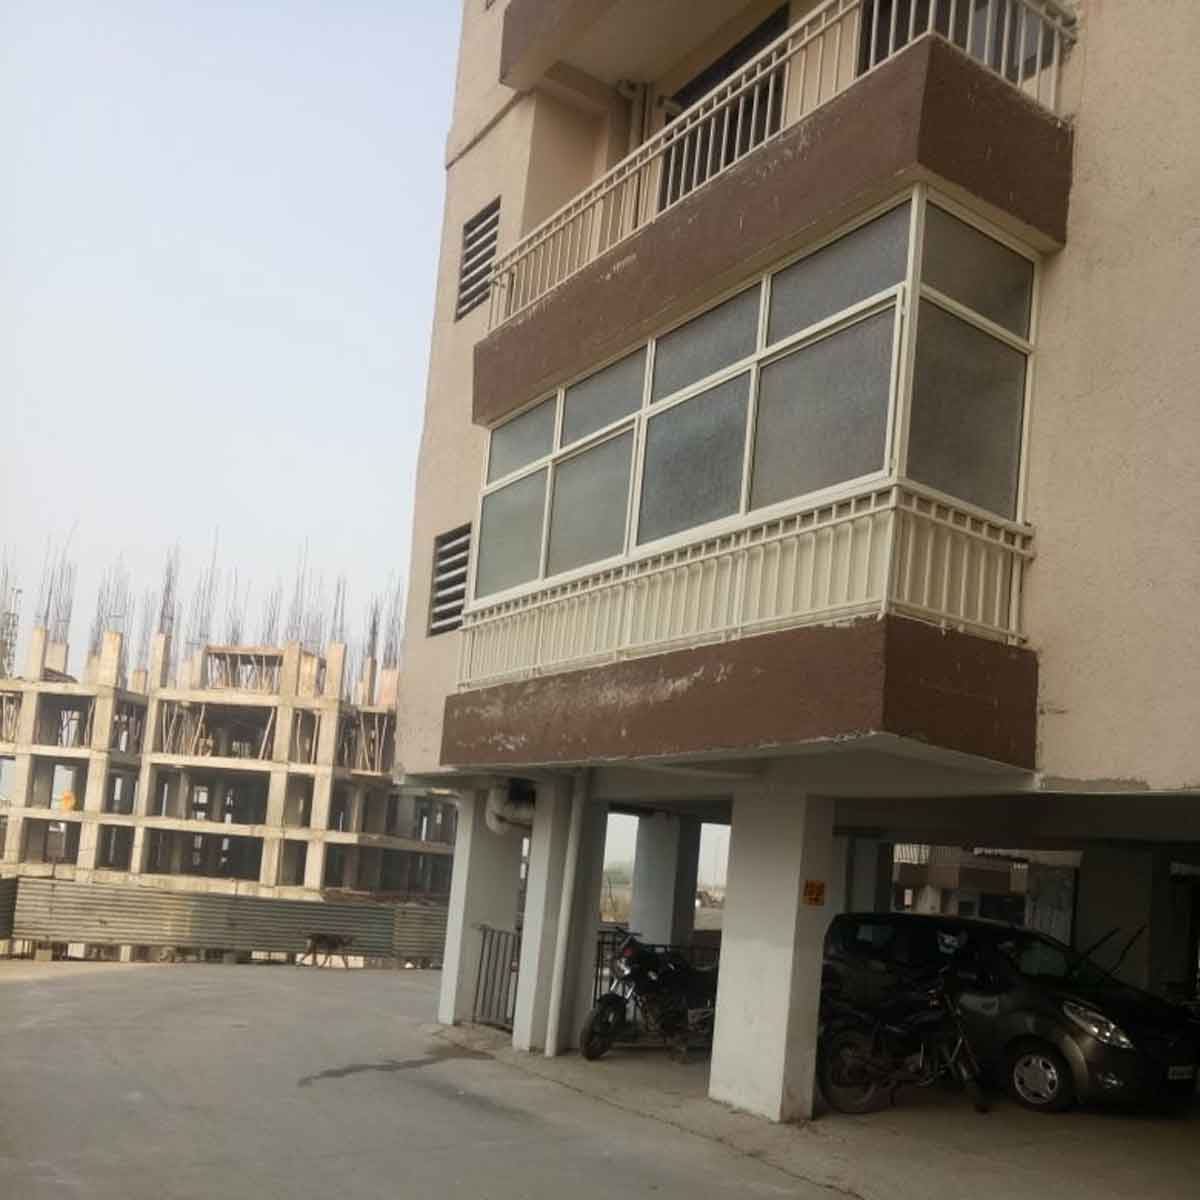 UPVC Aluminium Balcony Covering Manufacturers, Suppliers in Pithoragarh